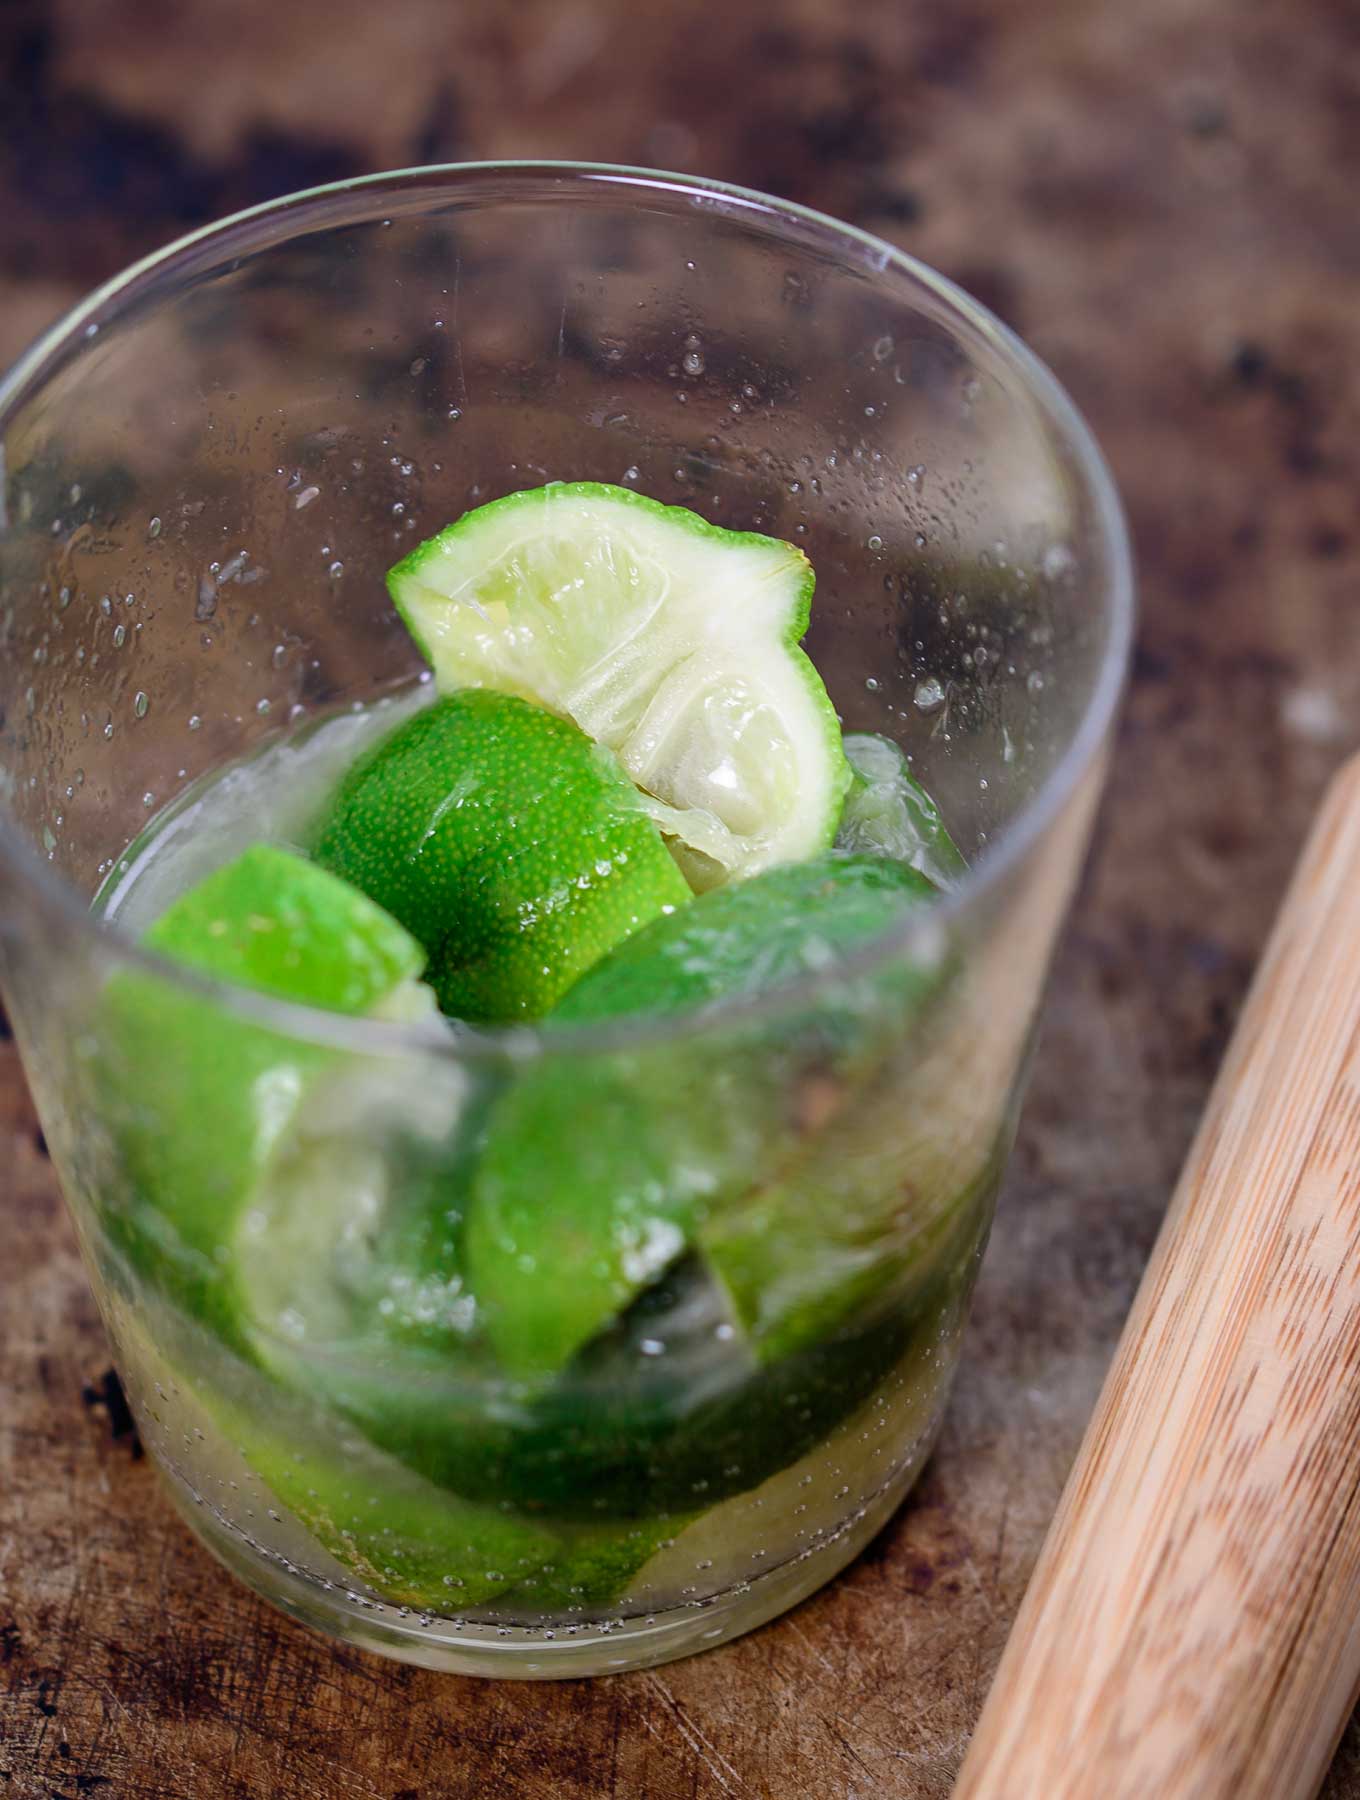 Muddled limes in a glass